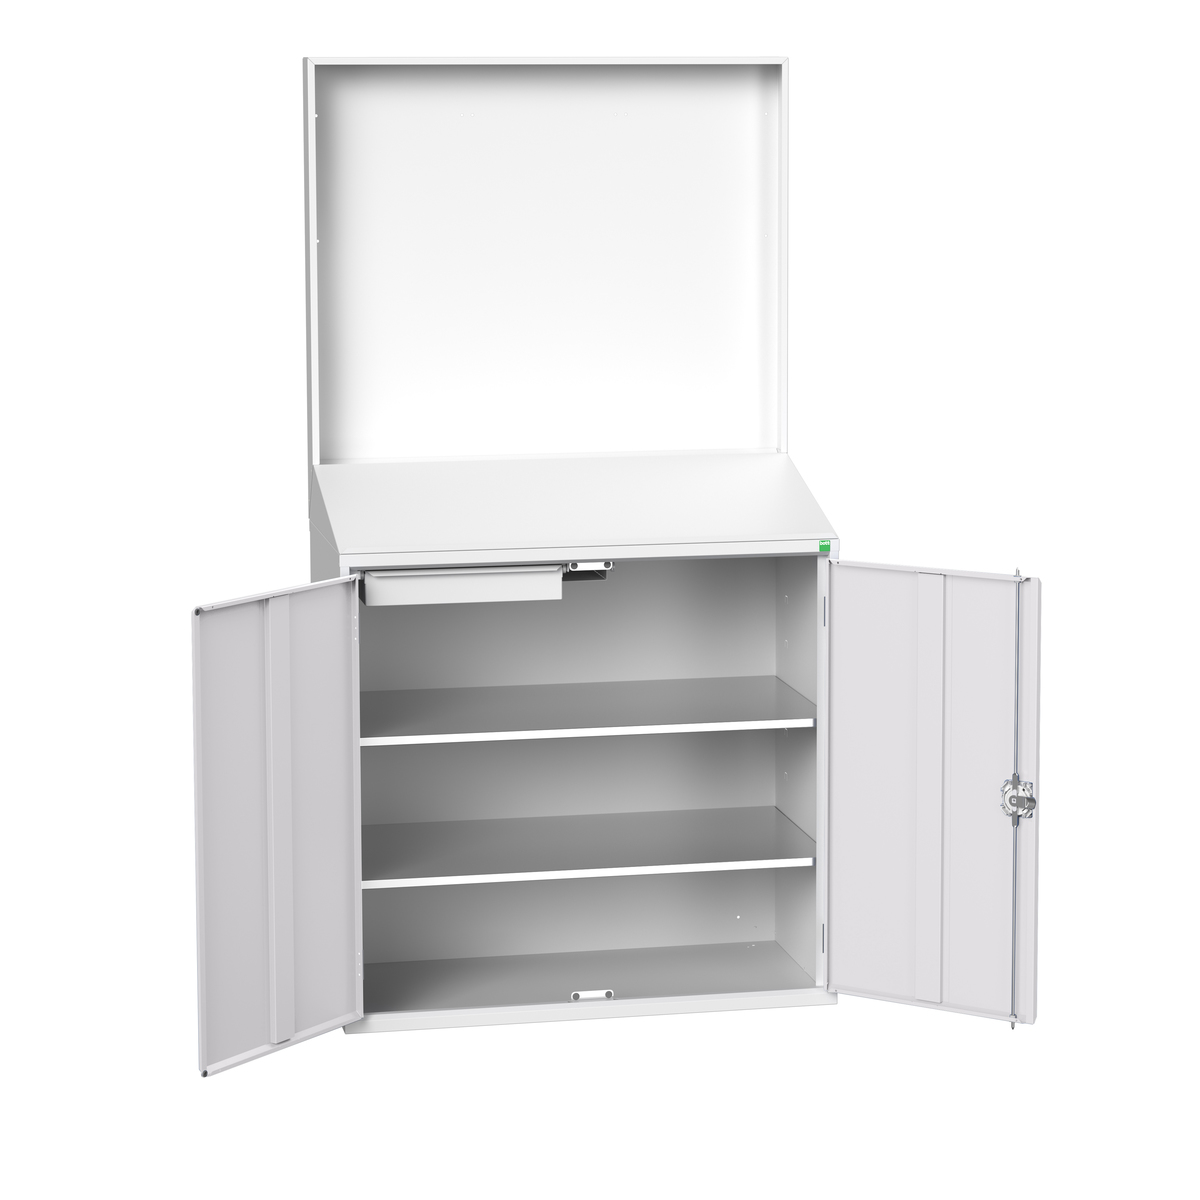 16929217.16 - verso economy lectern with backpanel